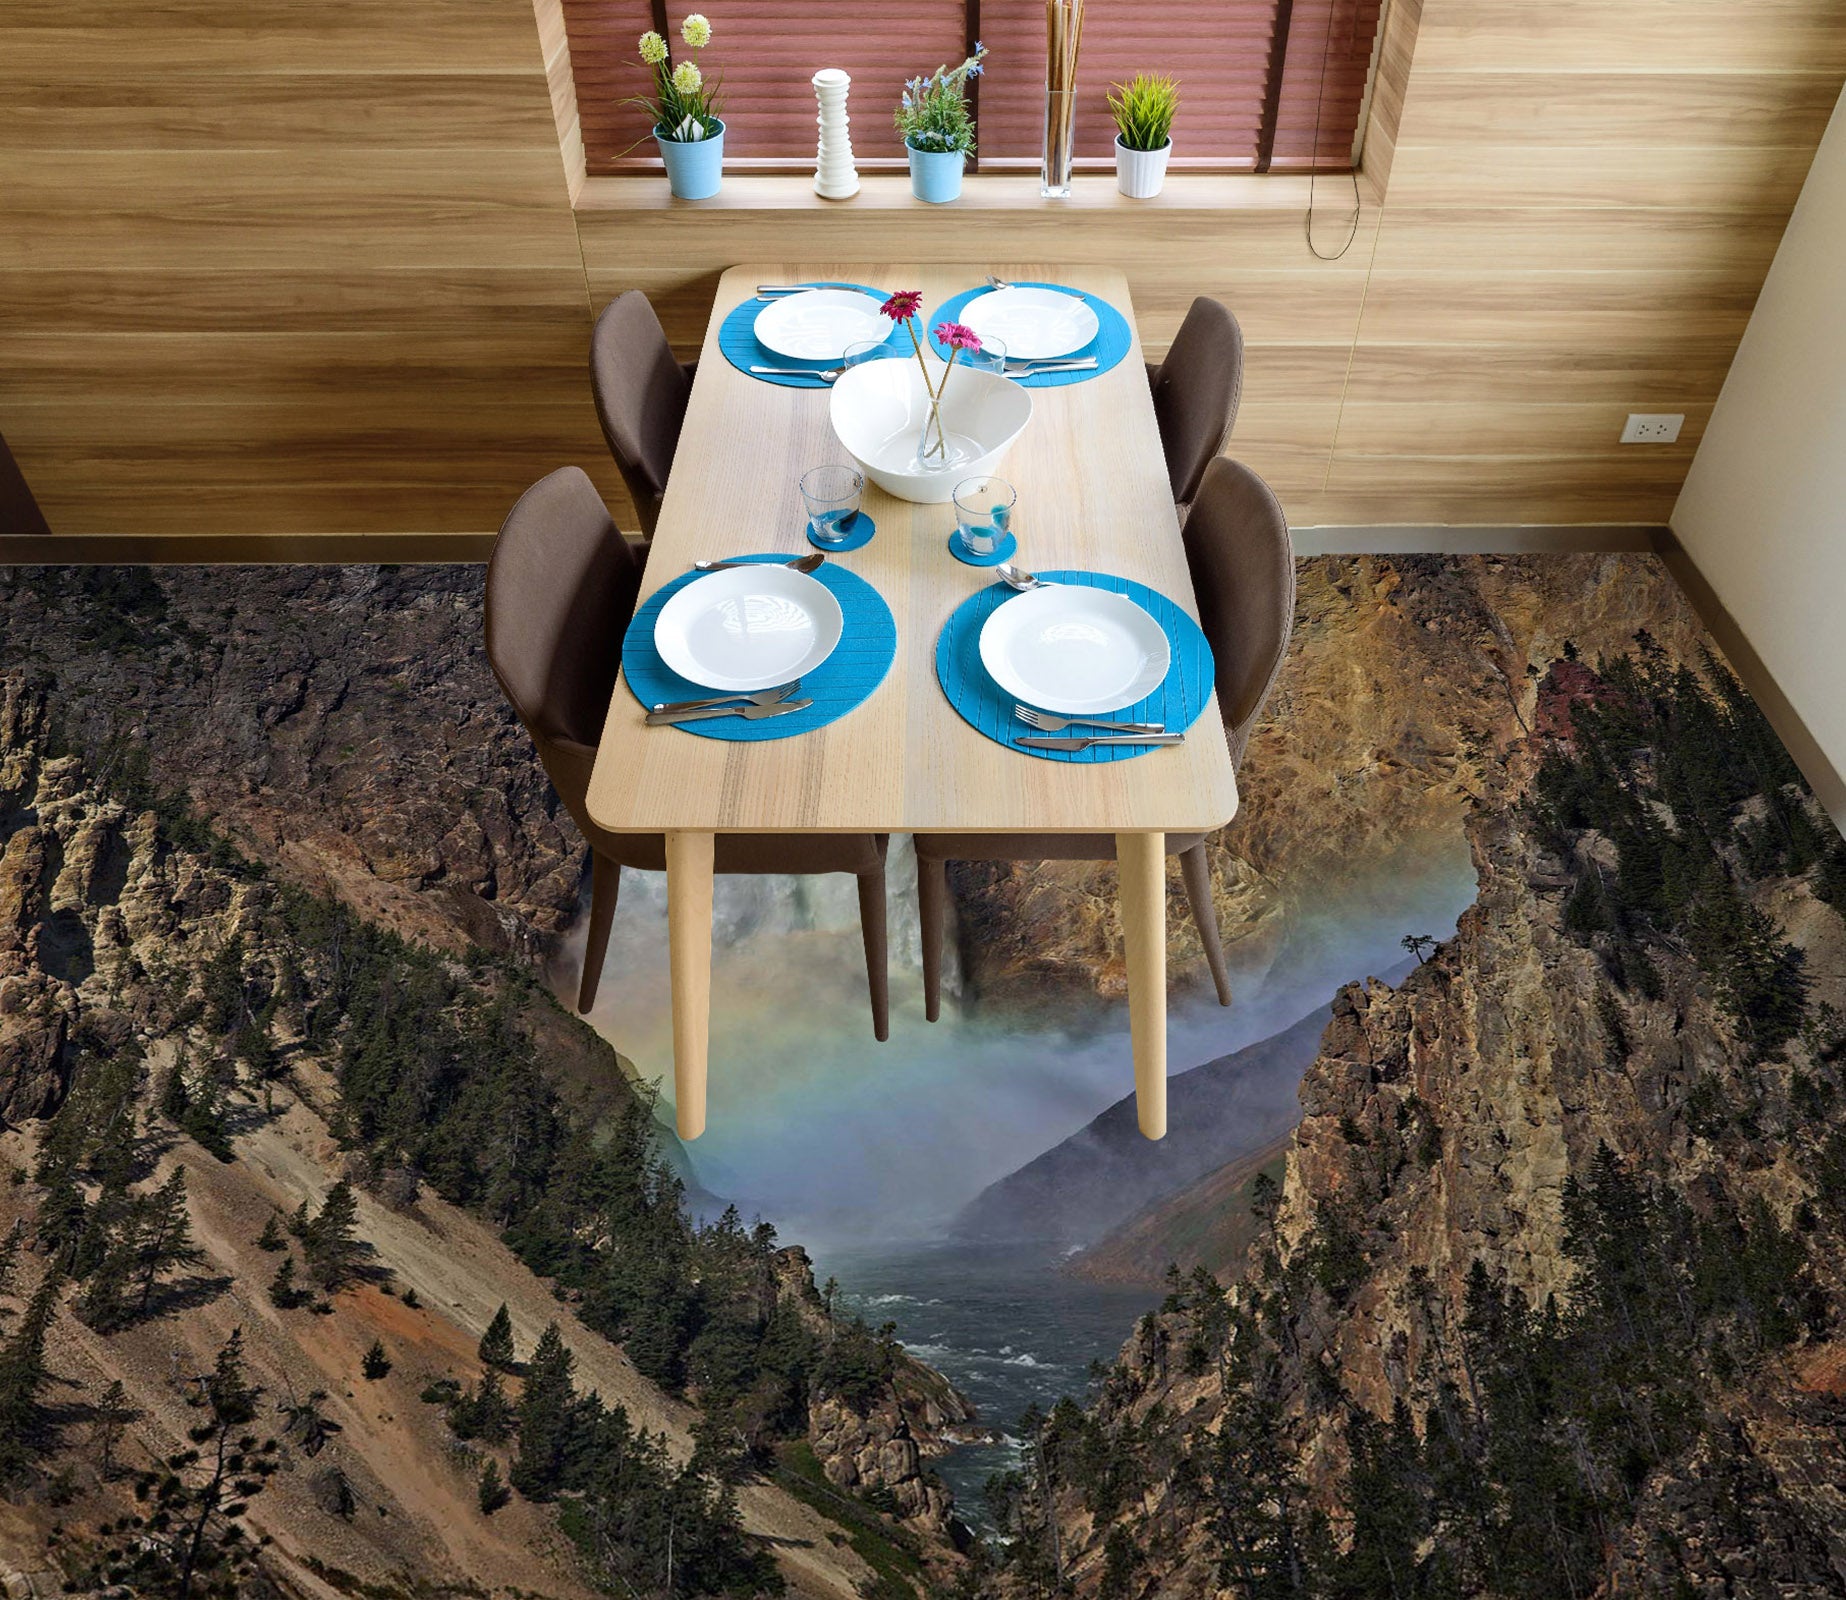 3D Mountains Trees 98190 Kathy Barefield Floor Mural  Wallpaper Murals Self-Adhesive Removable Print Epoxy